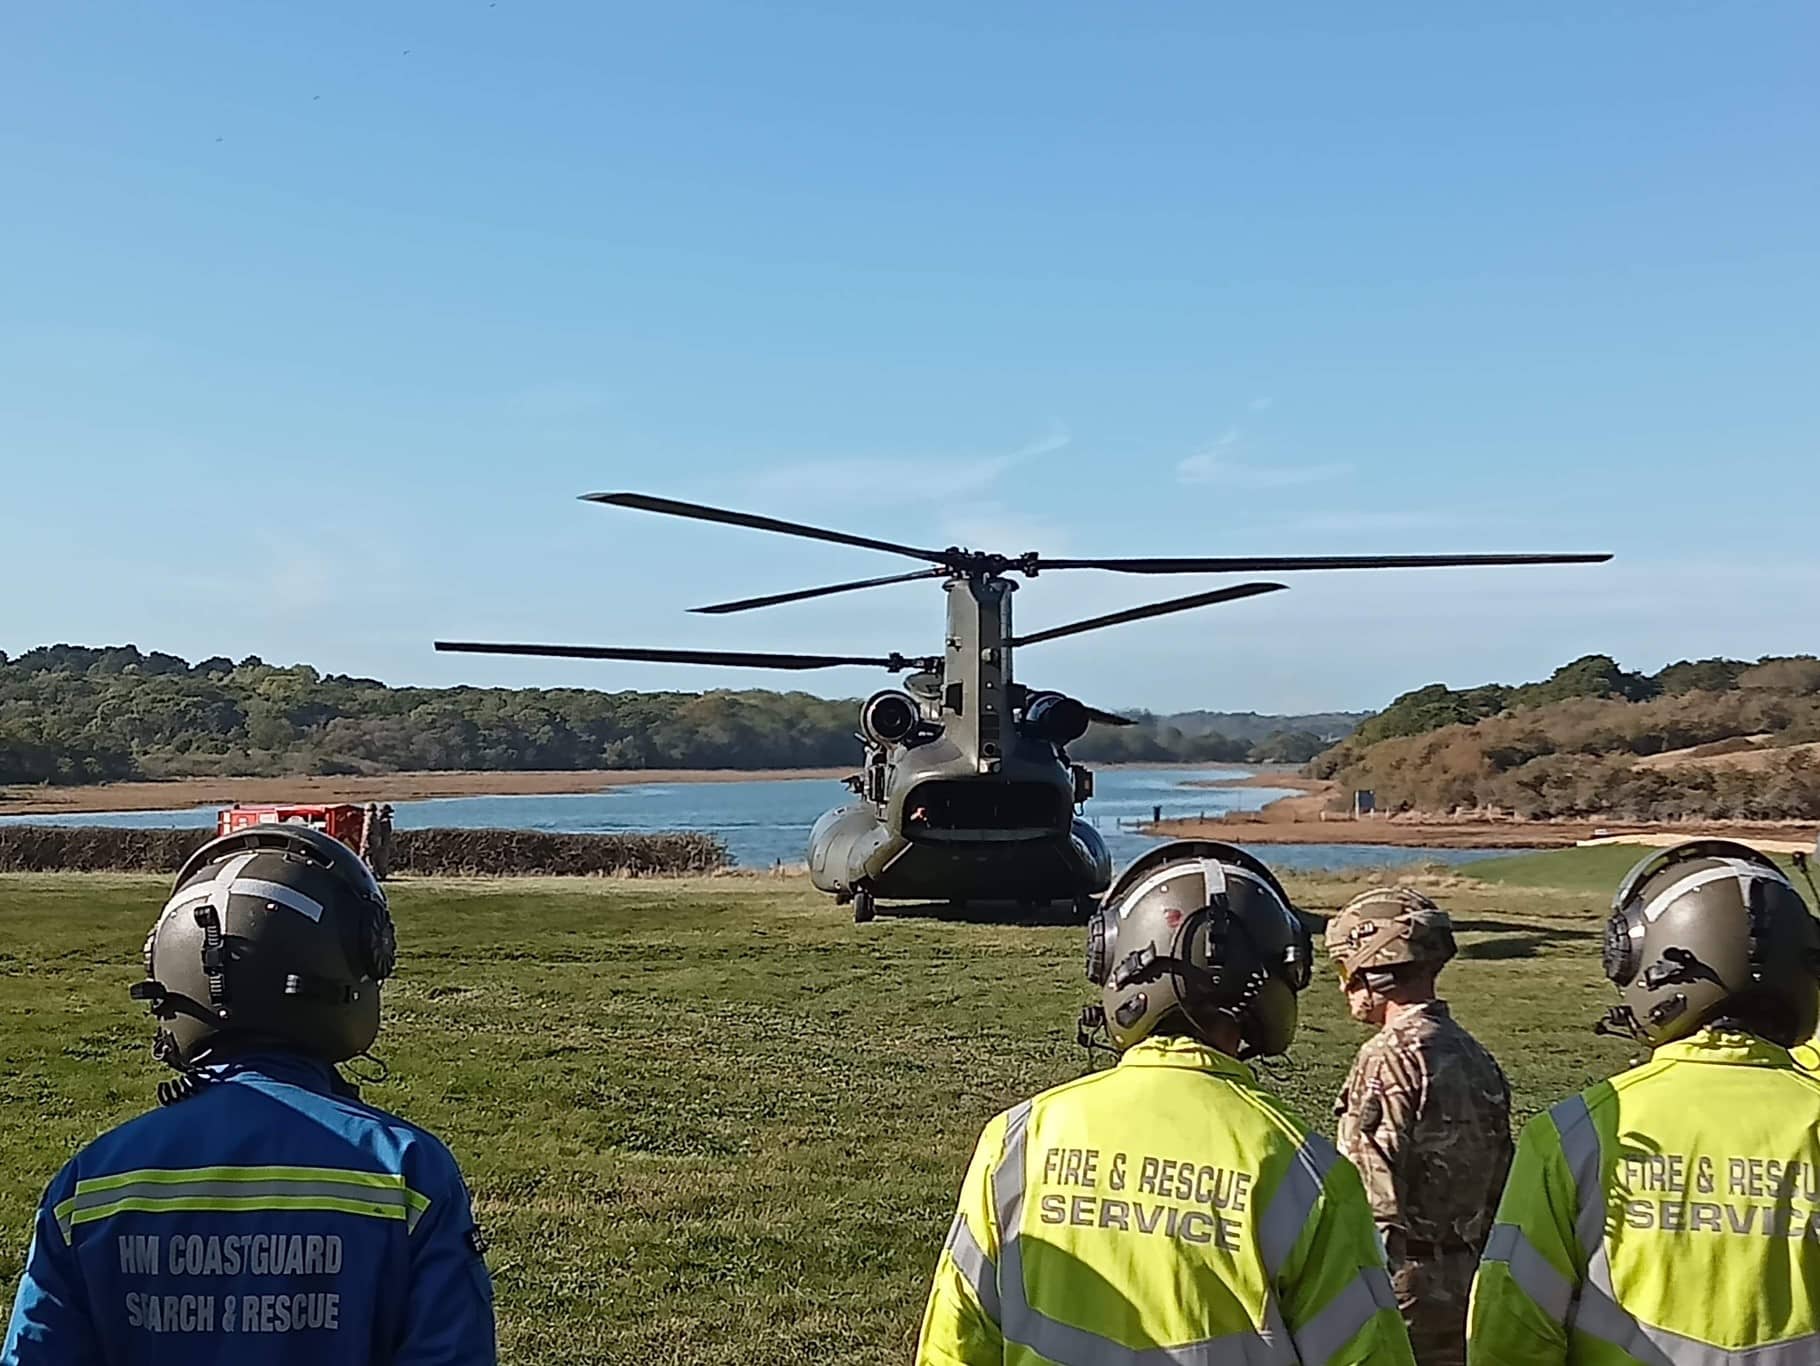 Chinook heavy lift exercise at Newtown